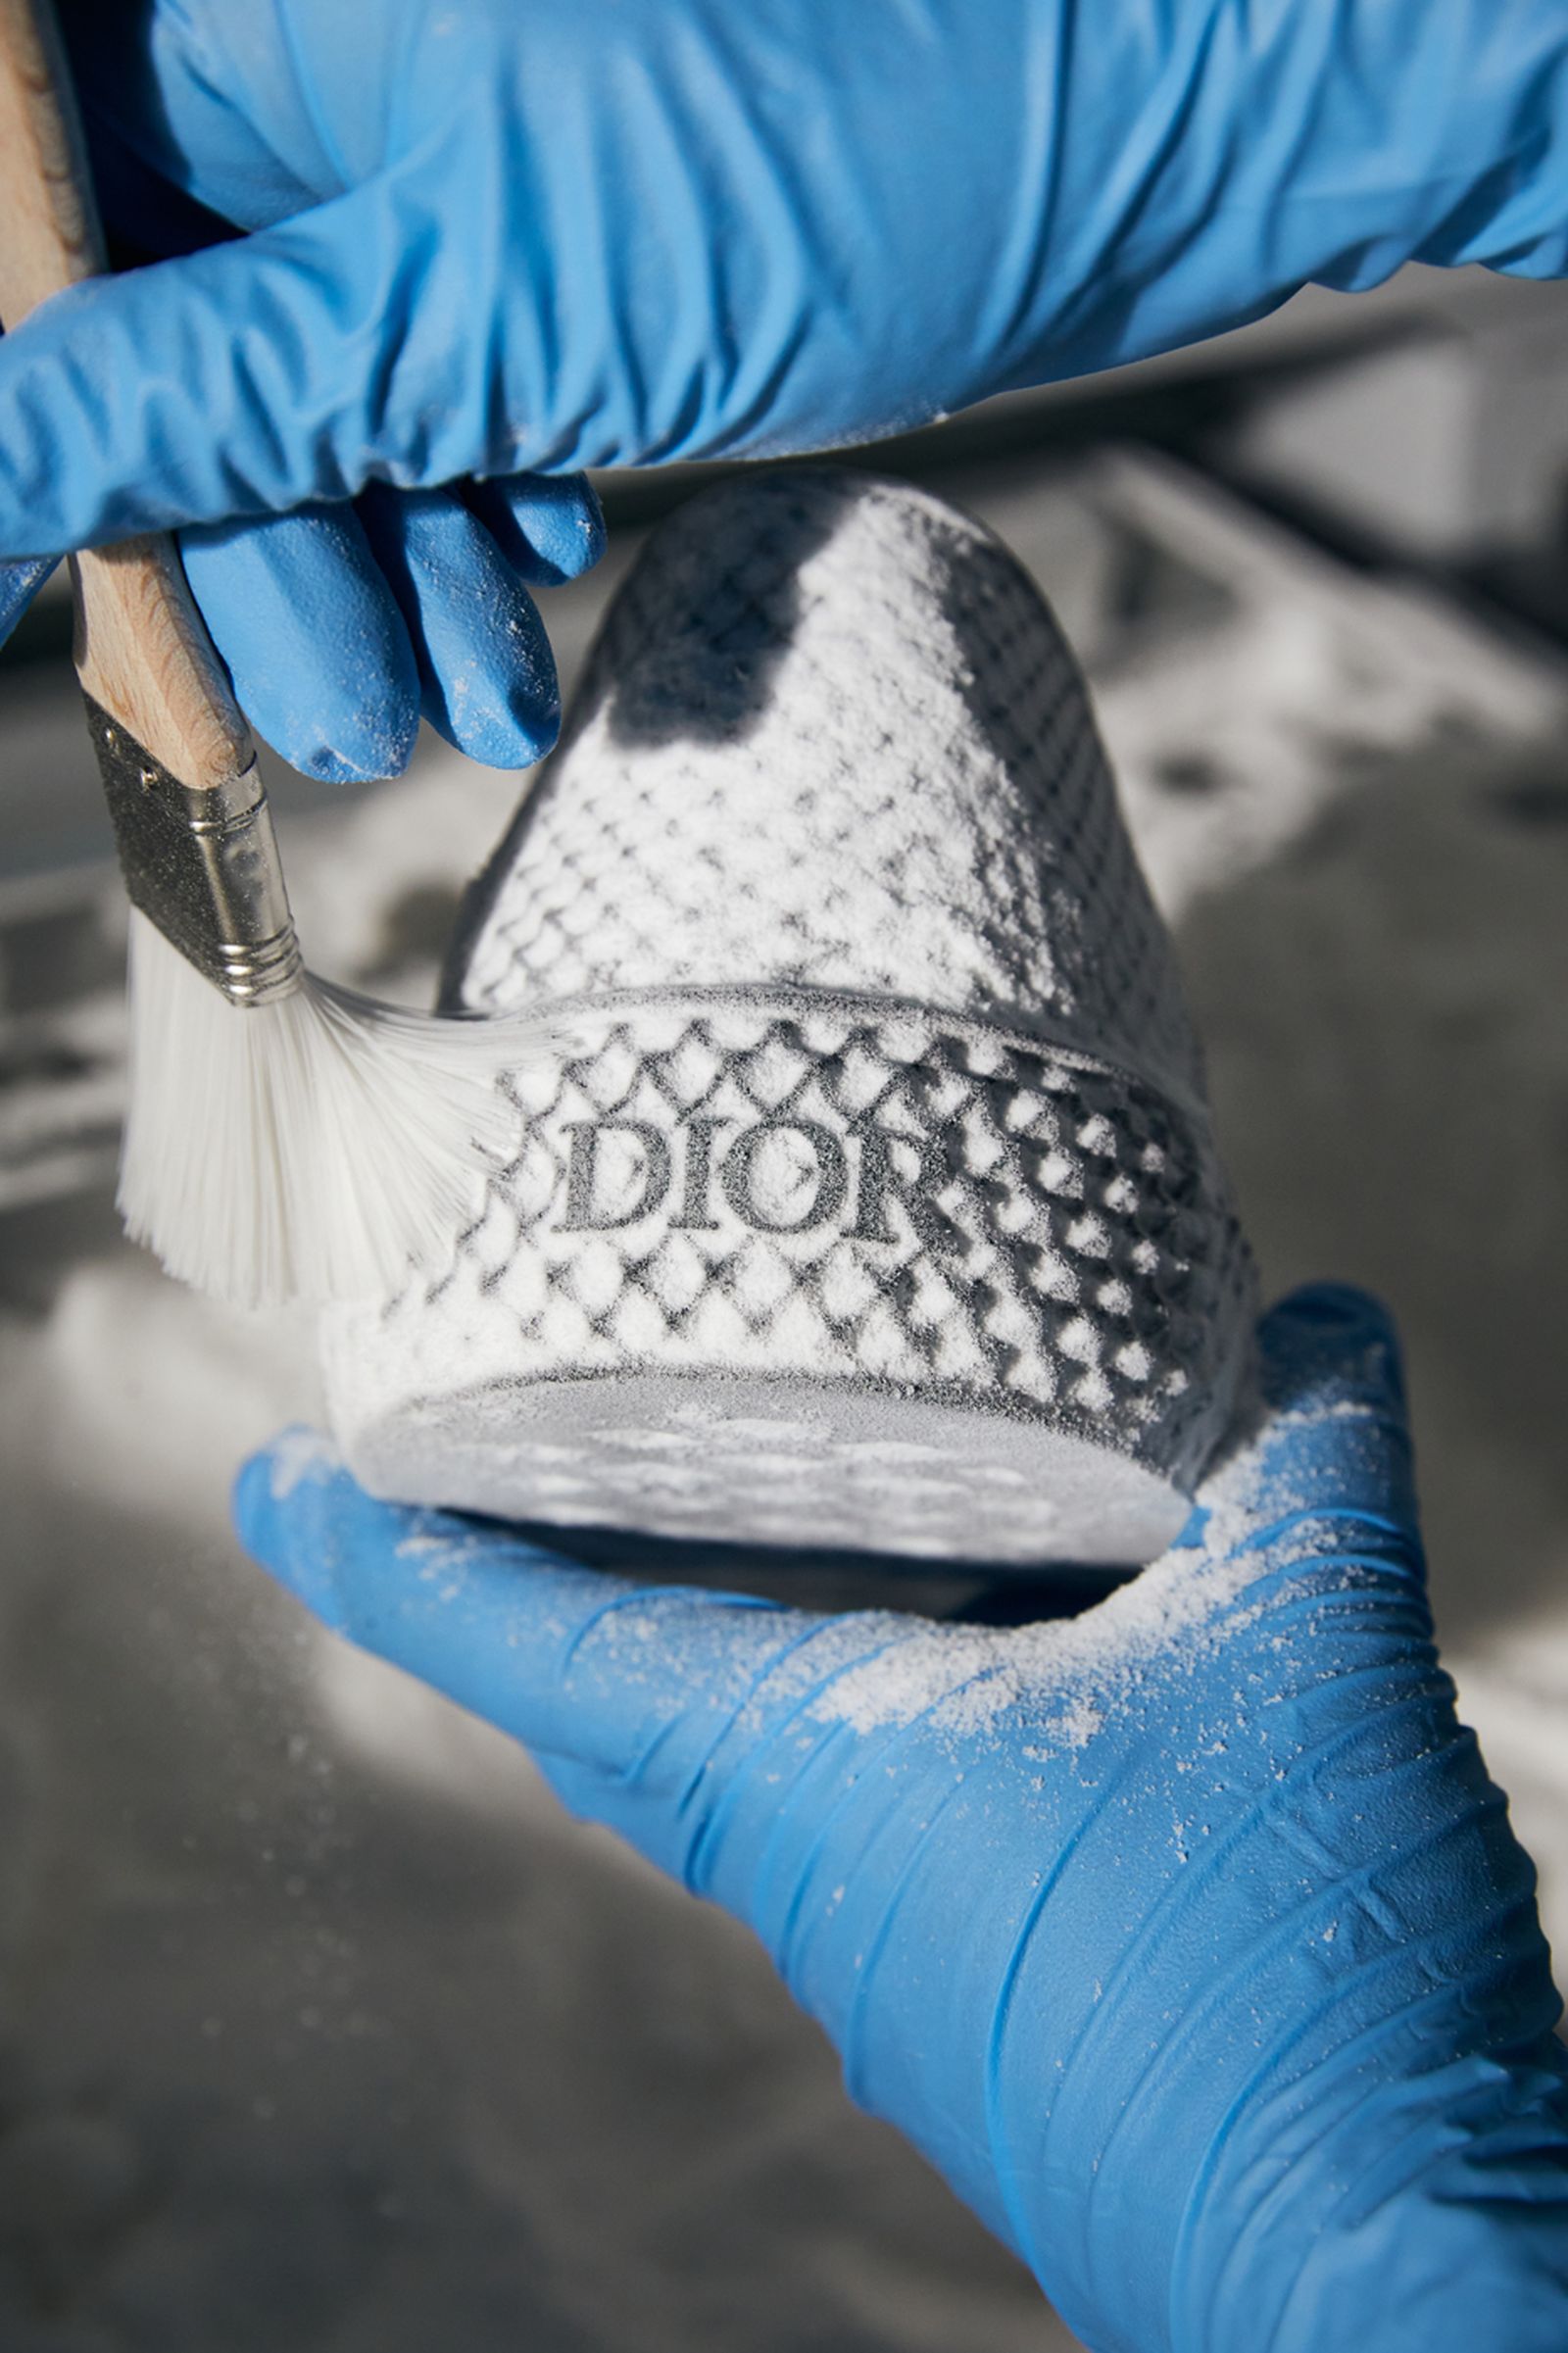 dior-3d-printed-shoes- (5)